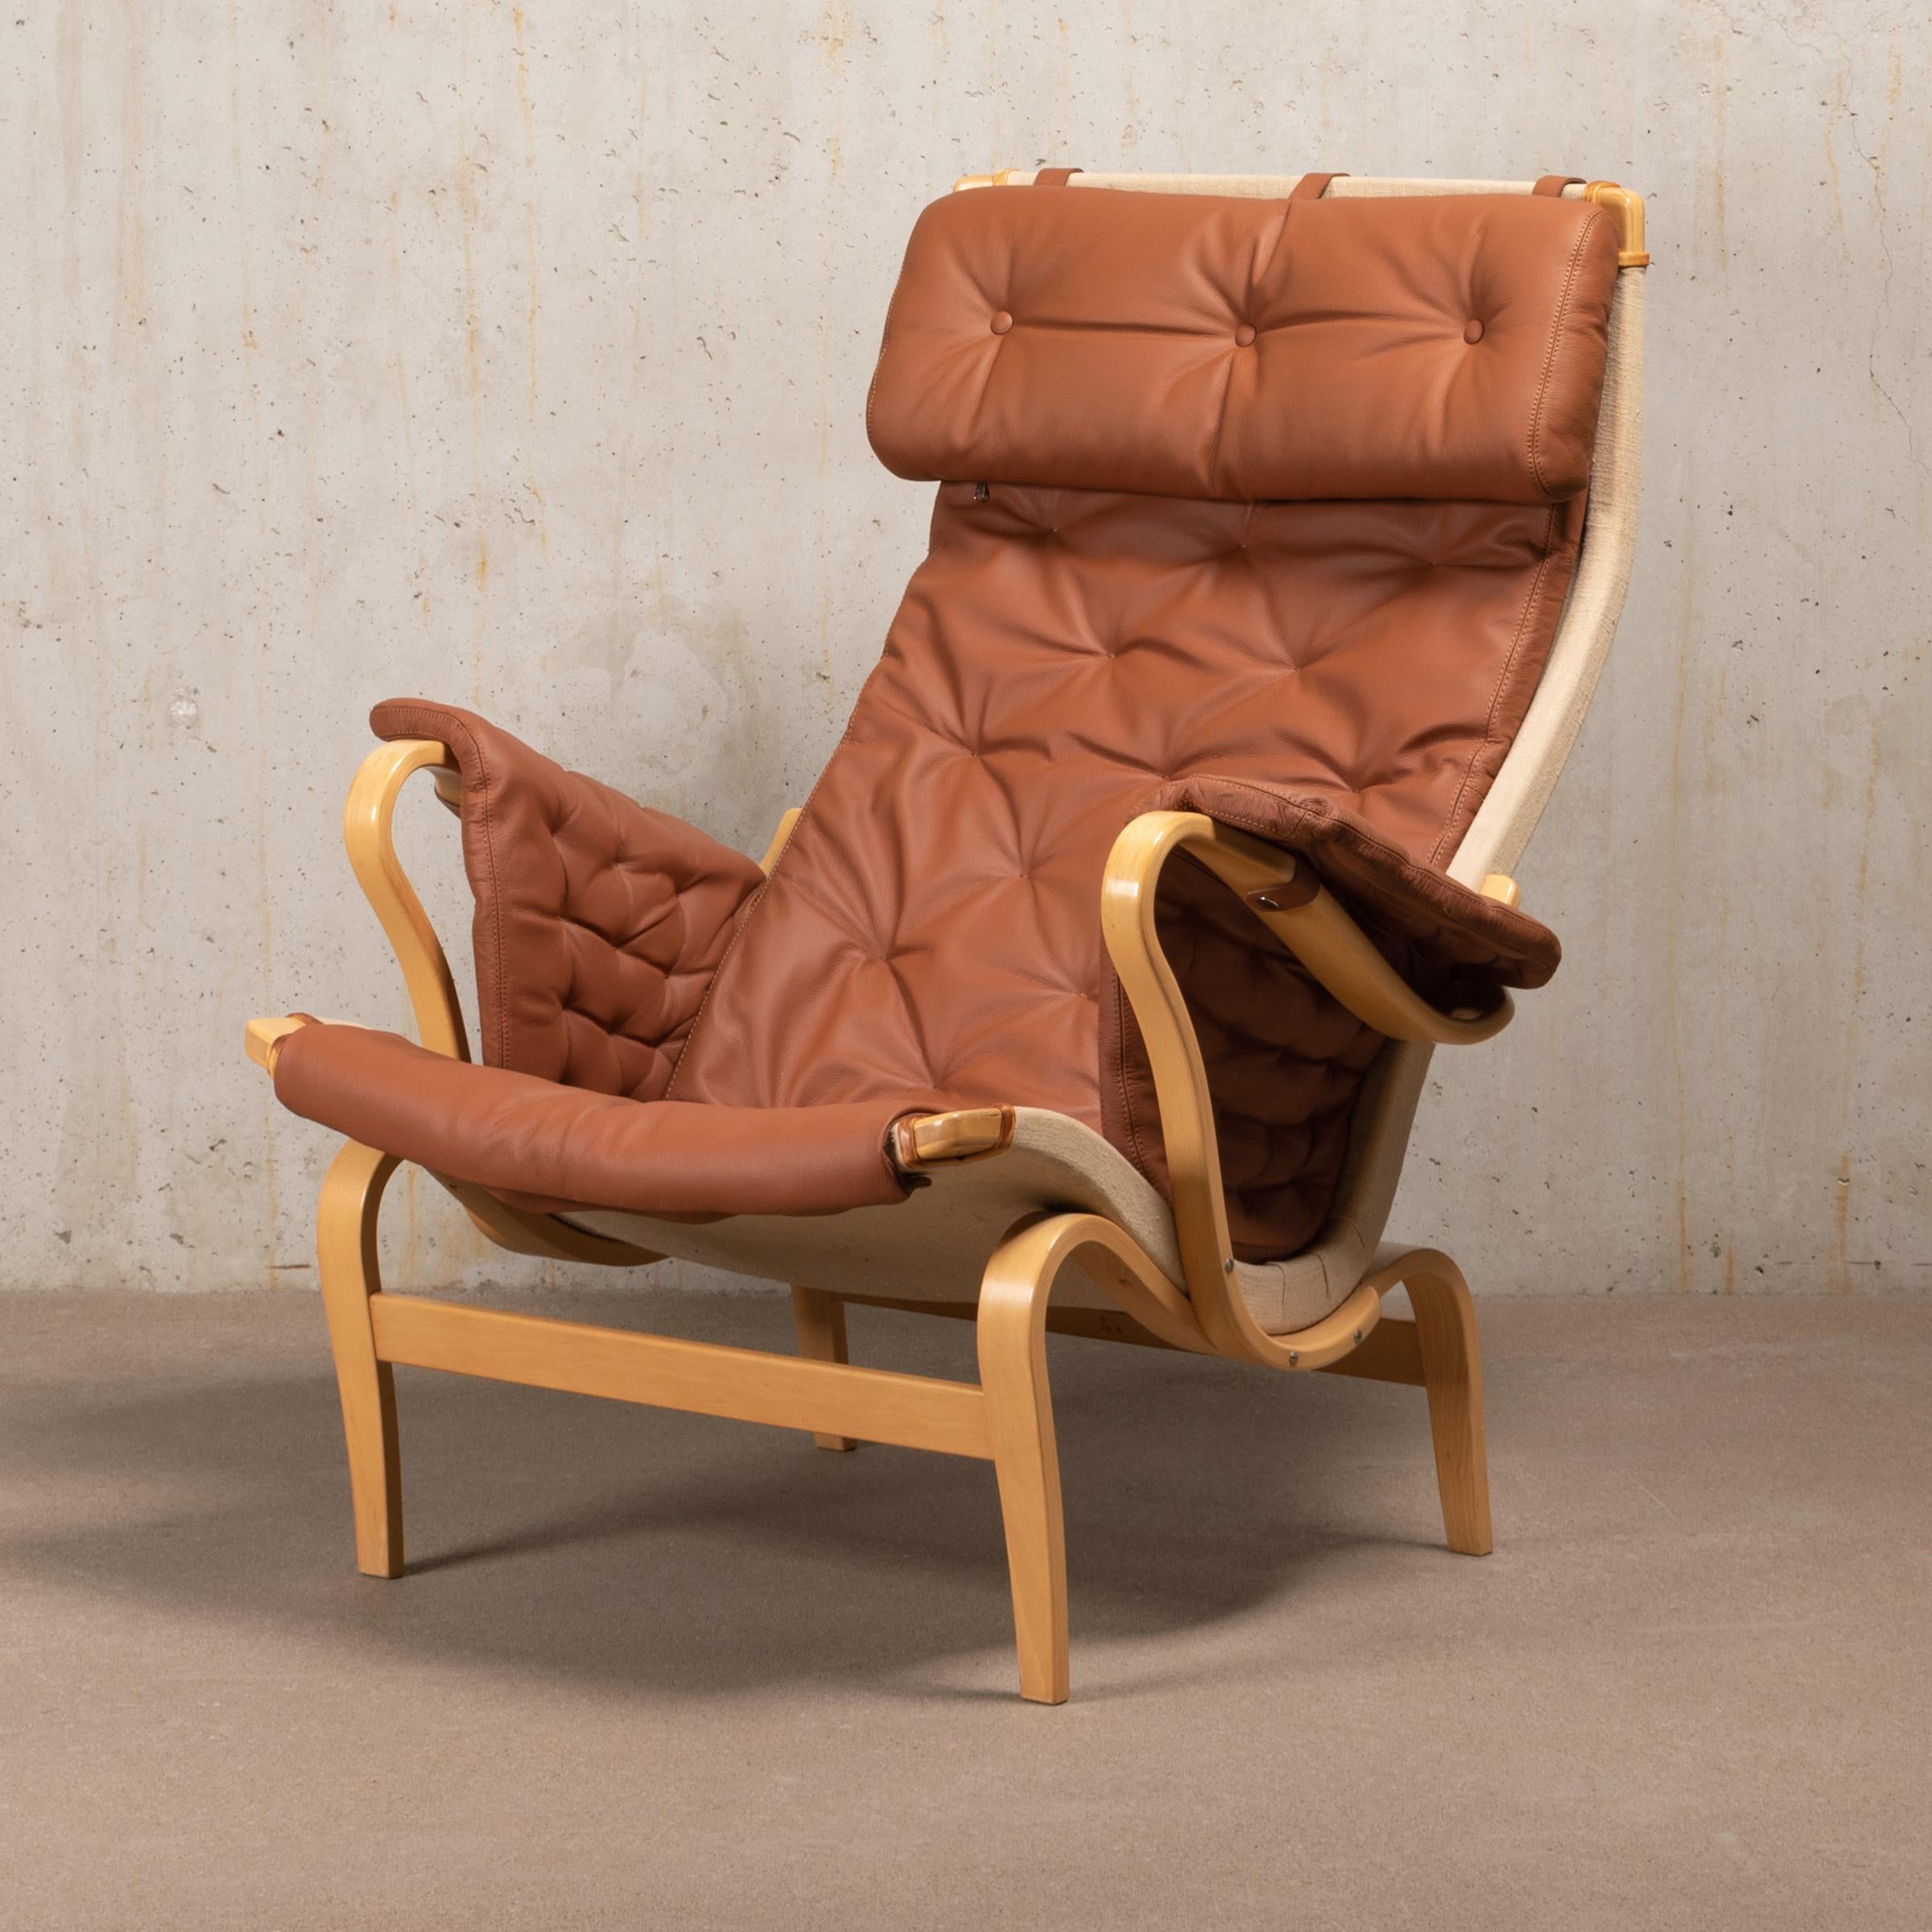 Comfortable easy lounge chair with ottoman designed by Bruno Mathsson in 1944 and manufactured by Dux, Sweden. Bended beech wood frame stretched with canvas and reupholstered with light brown coloured leather in excellent condition. Both chair and